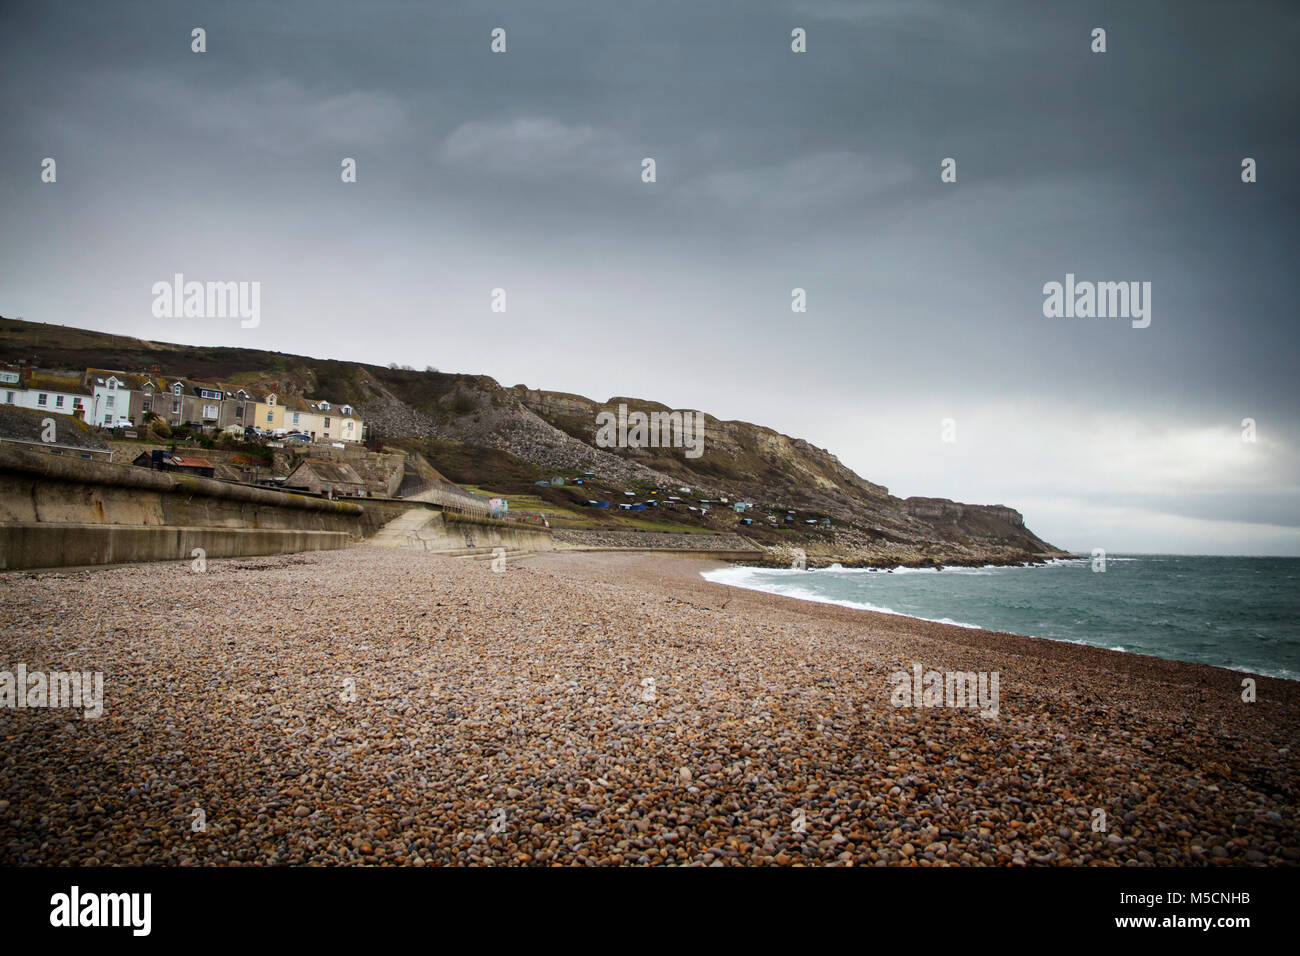 WEYMOUTH, DORSET, UK - DECEMBER 26. 2017. Dark skies over Chesil famous for its pebble beach in Weymouth, a coastal town in the county of Dorset, Engl Stock Photo